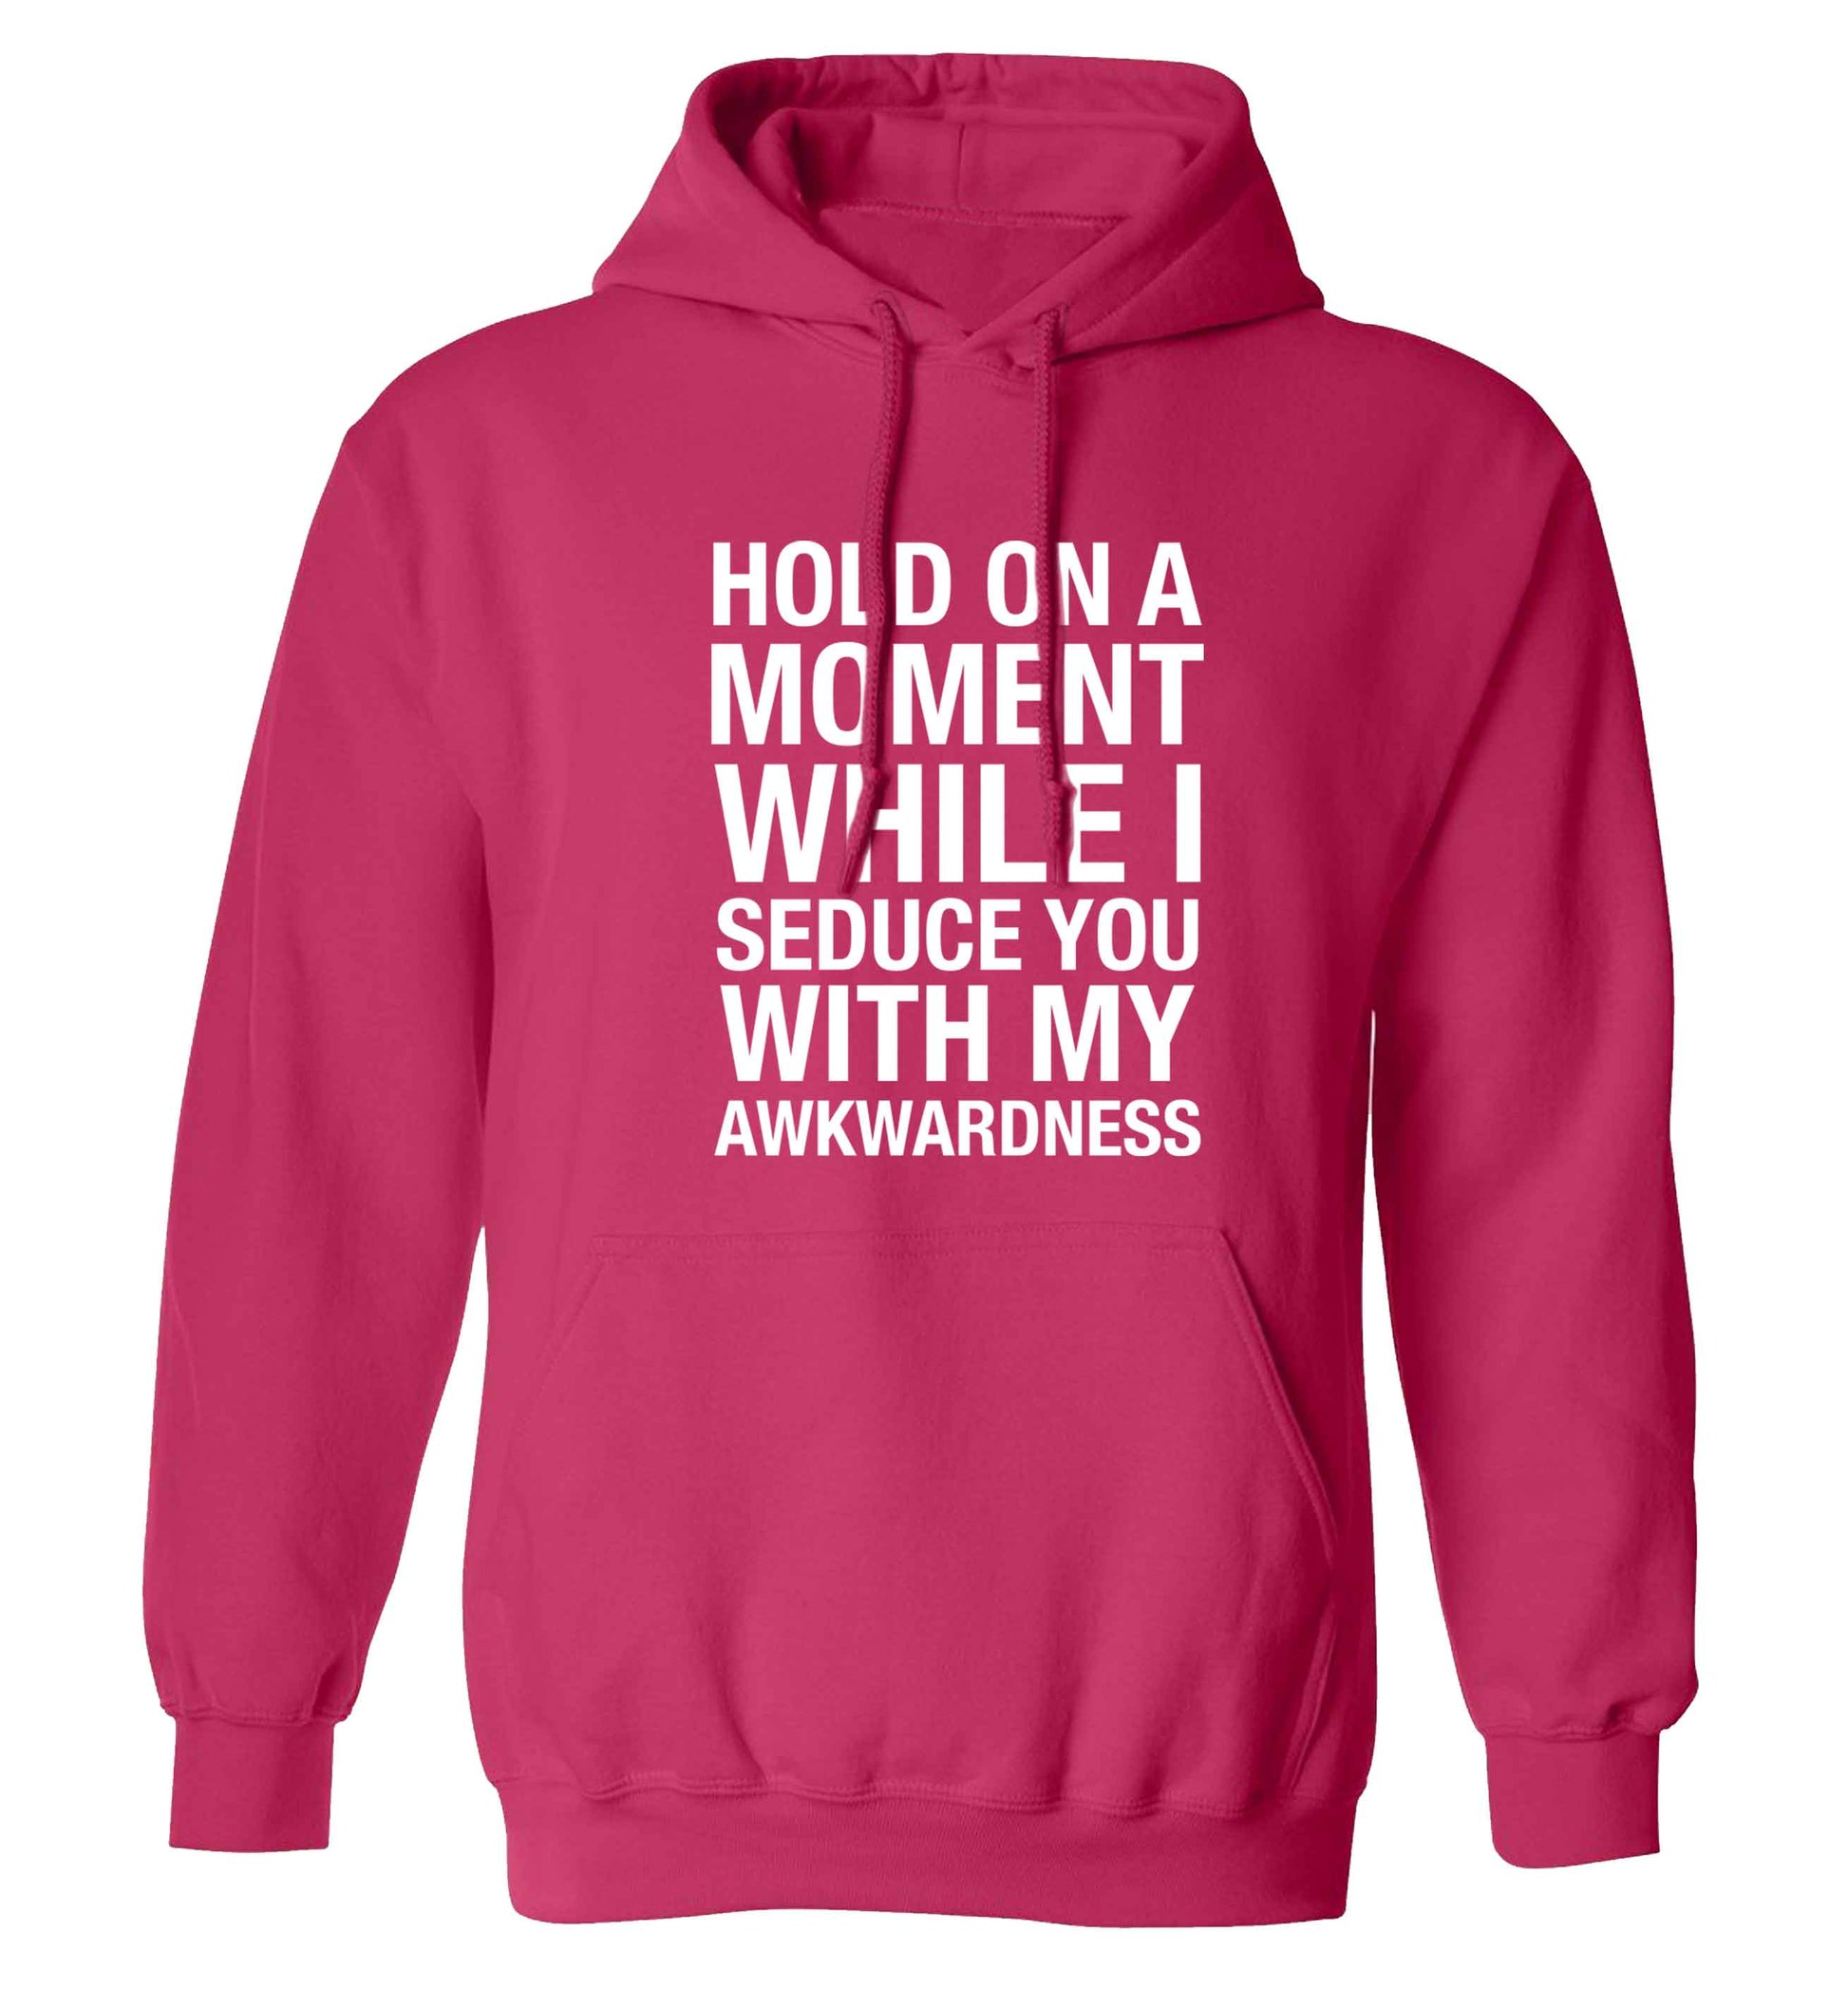 Hold on a moment while I seduce you with my awkwardness adults unisex pink hoodie 2XL